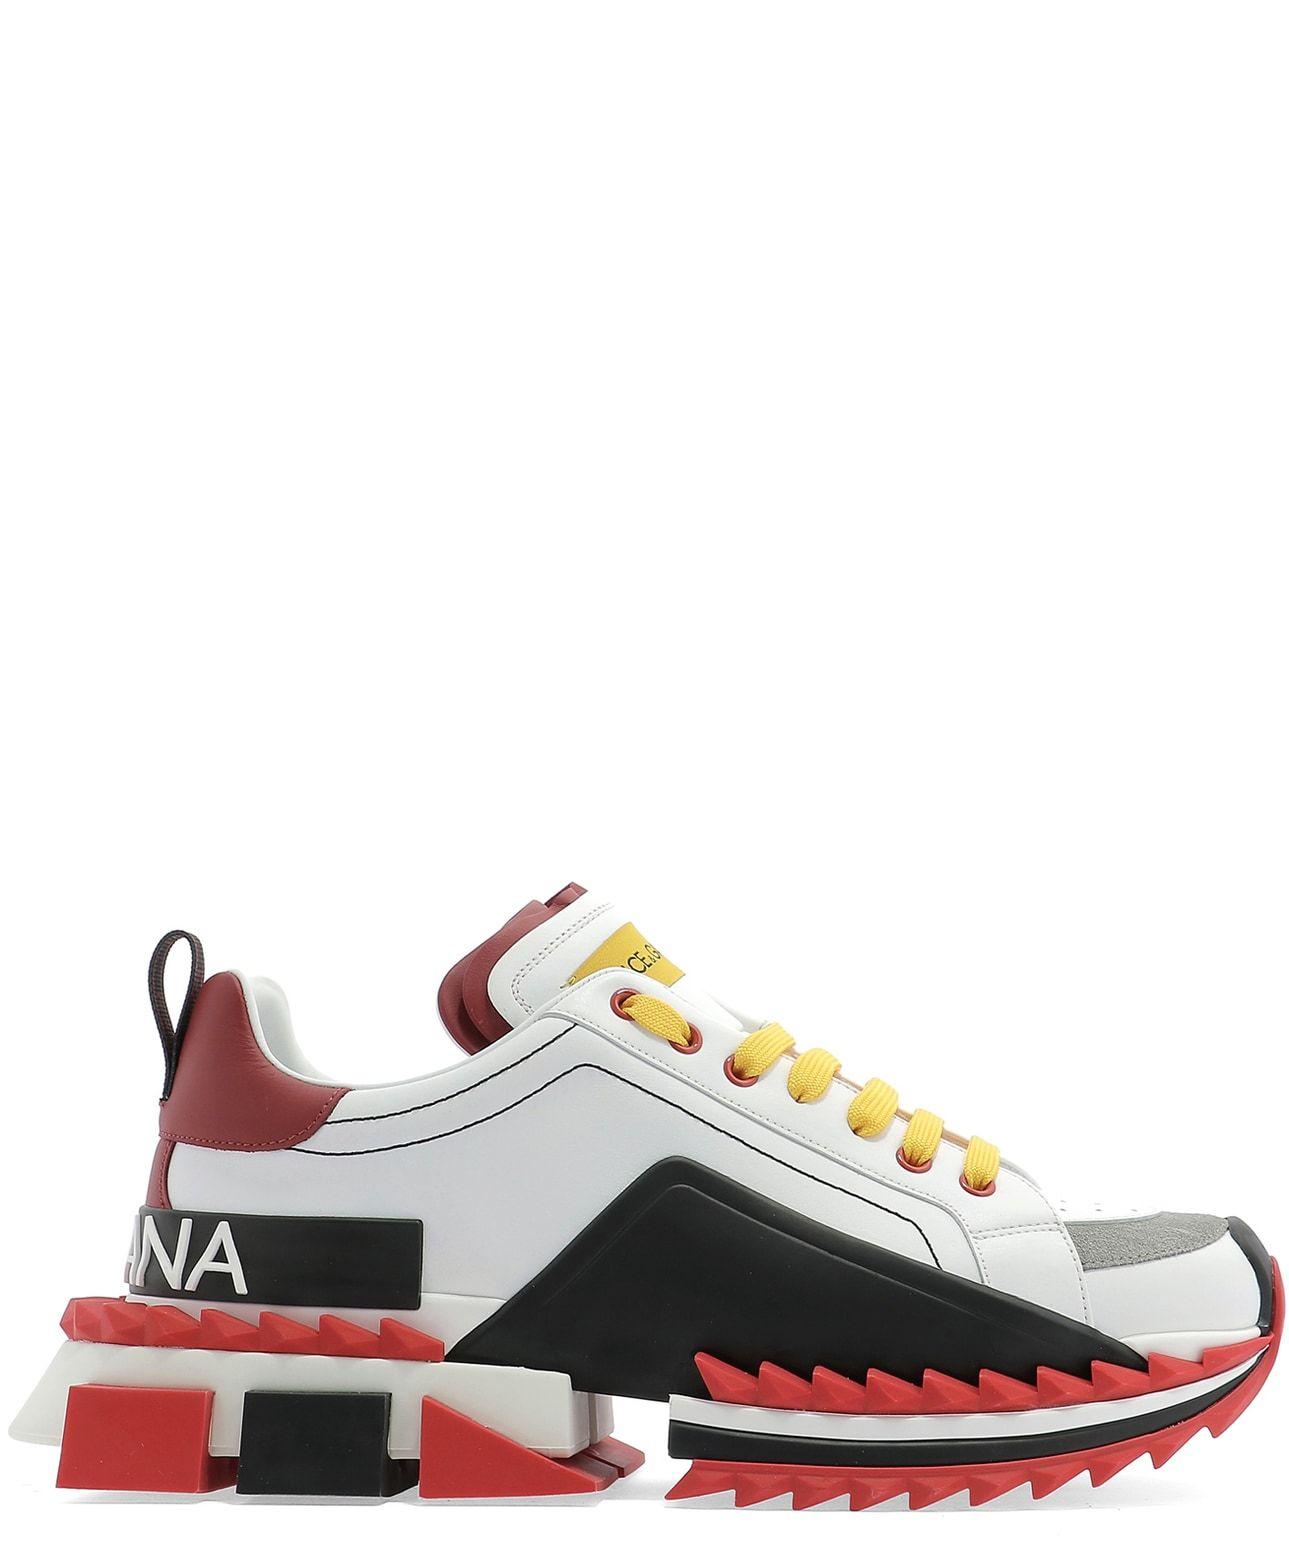 Dolce & Gabbana Super King Sneakers in Black / Red / White (Red) for ...